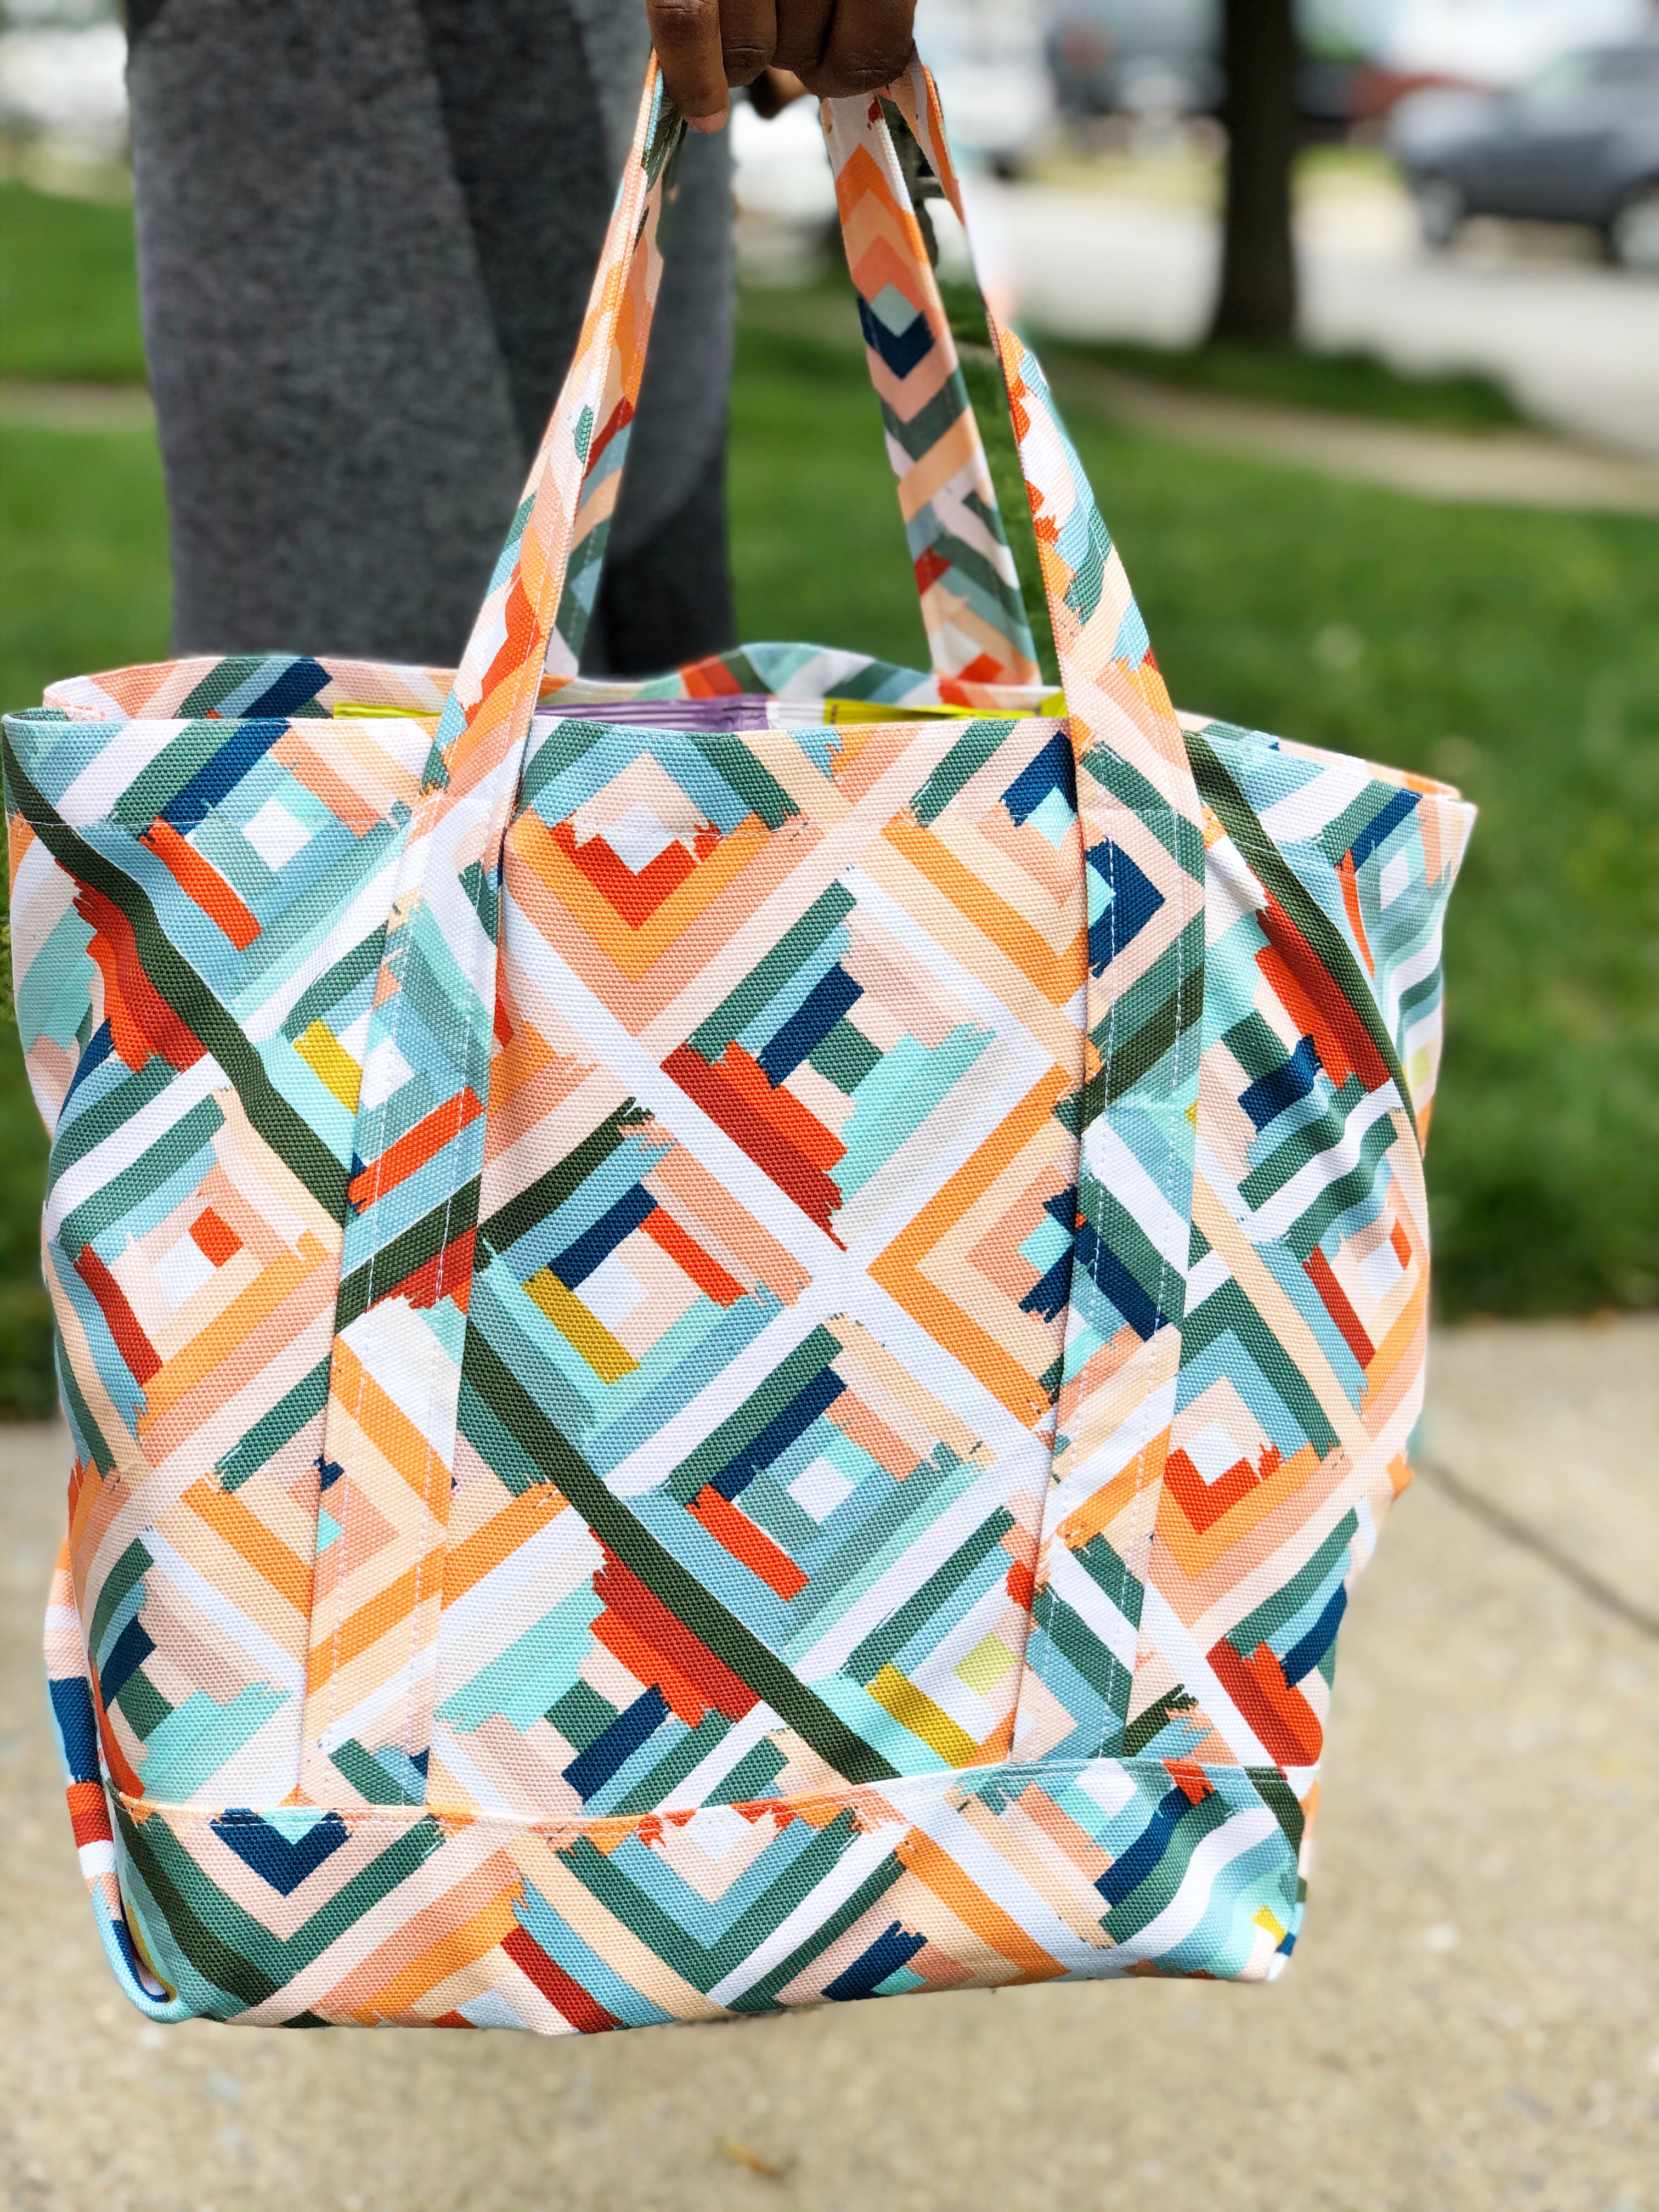 Canvas Market Bag Tutorial: Finished Project